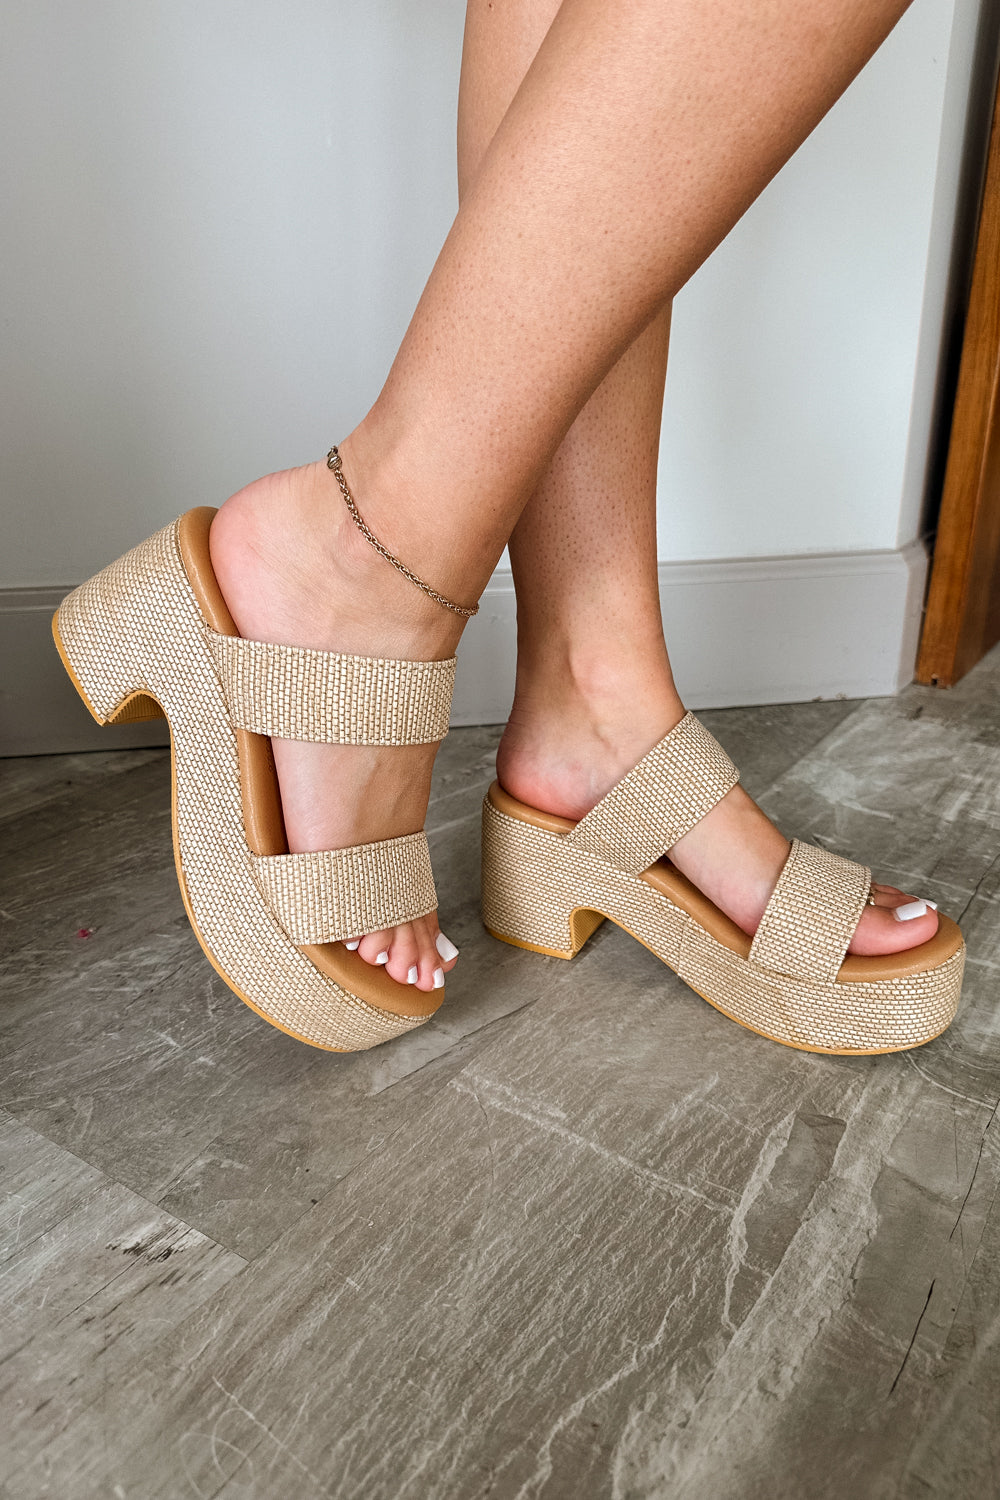 Side view of female model wearing the Ocean Avenue Platform Sandal in Natural which features Natural Tan Fabric, Chunky Platform, Block Heel, Slide-On Style and Two Strap Design